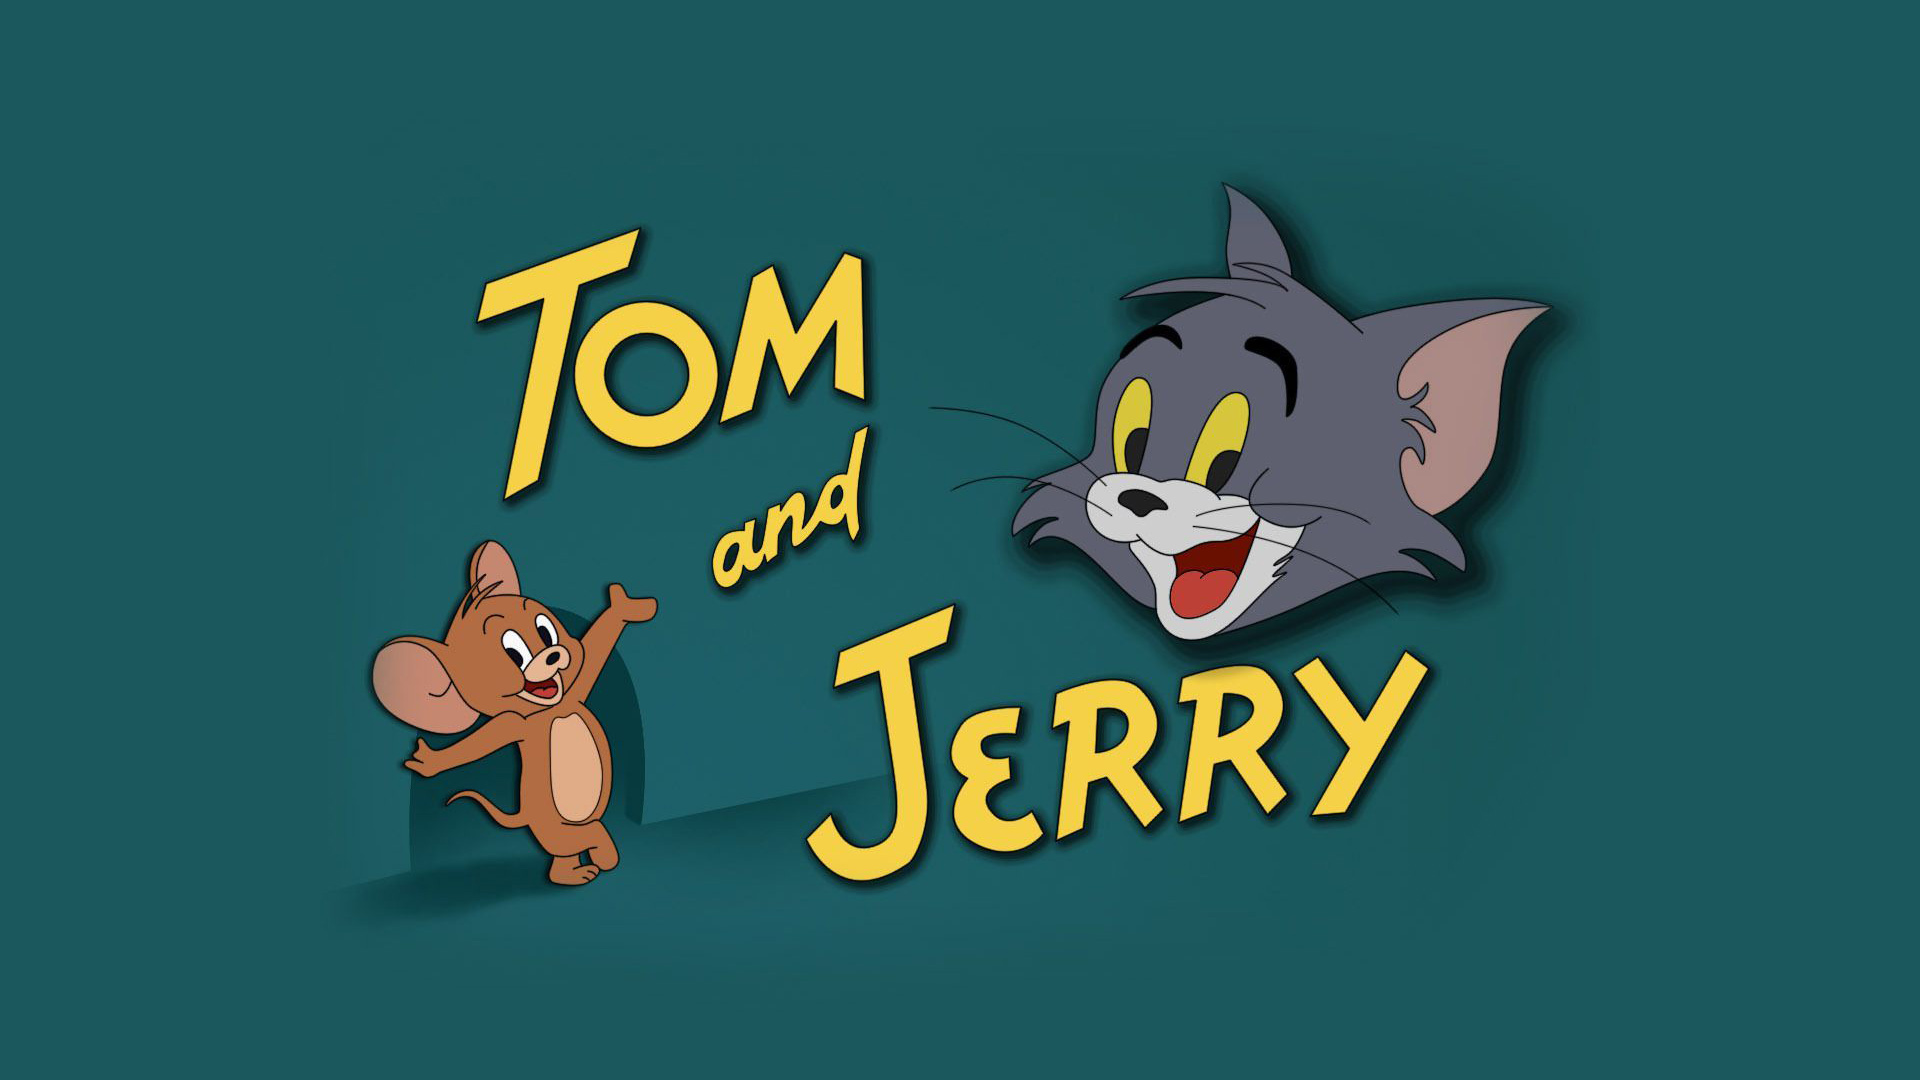 Tom and jerry cat and mouse background picture classic desktop wallpaper